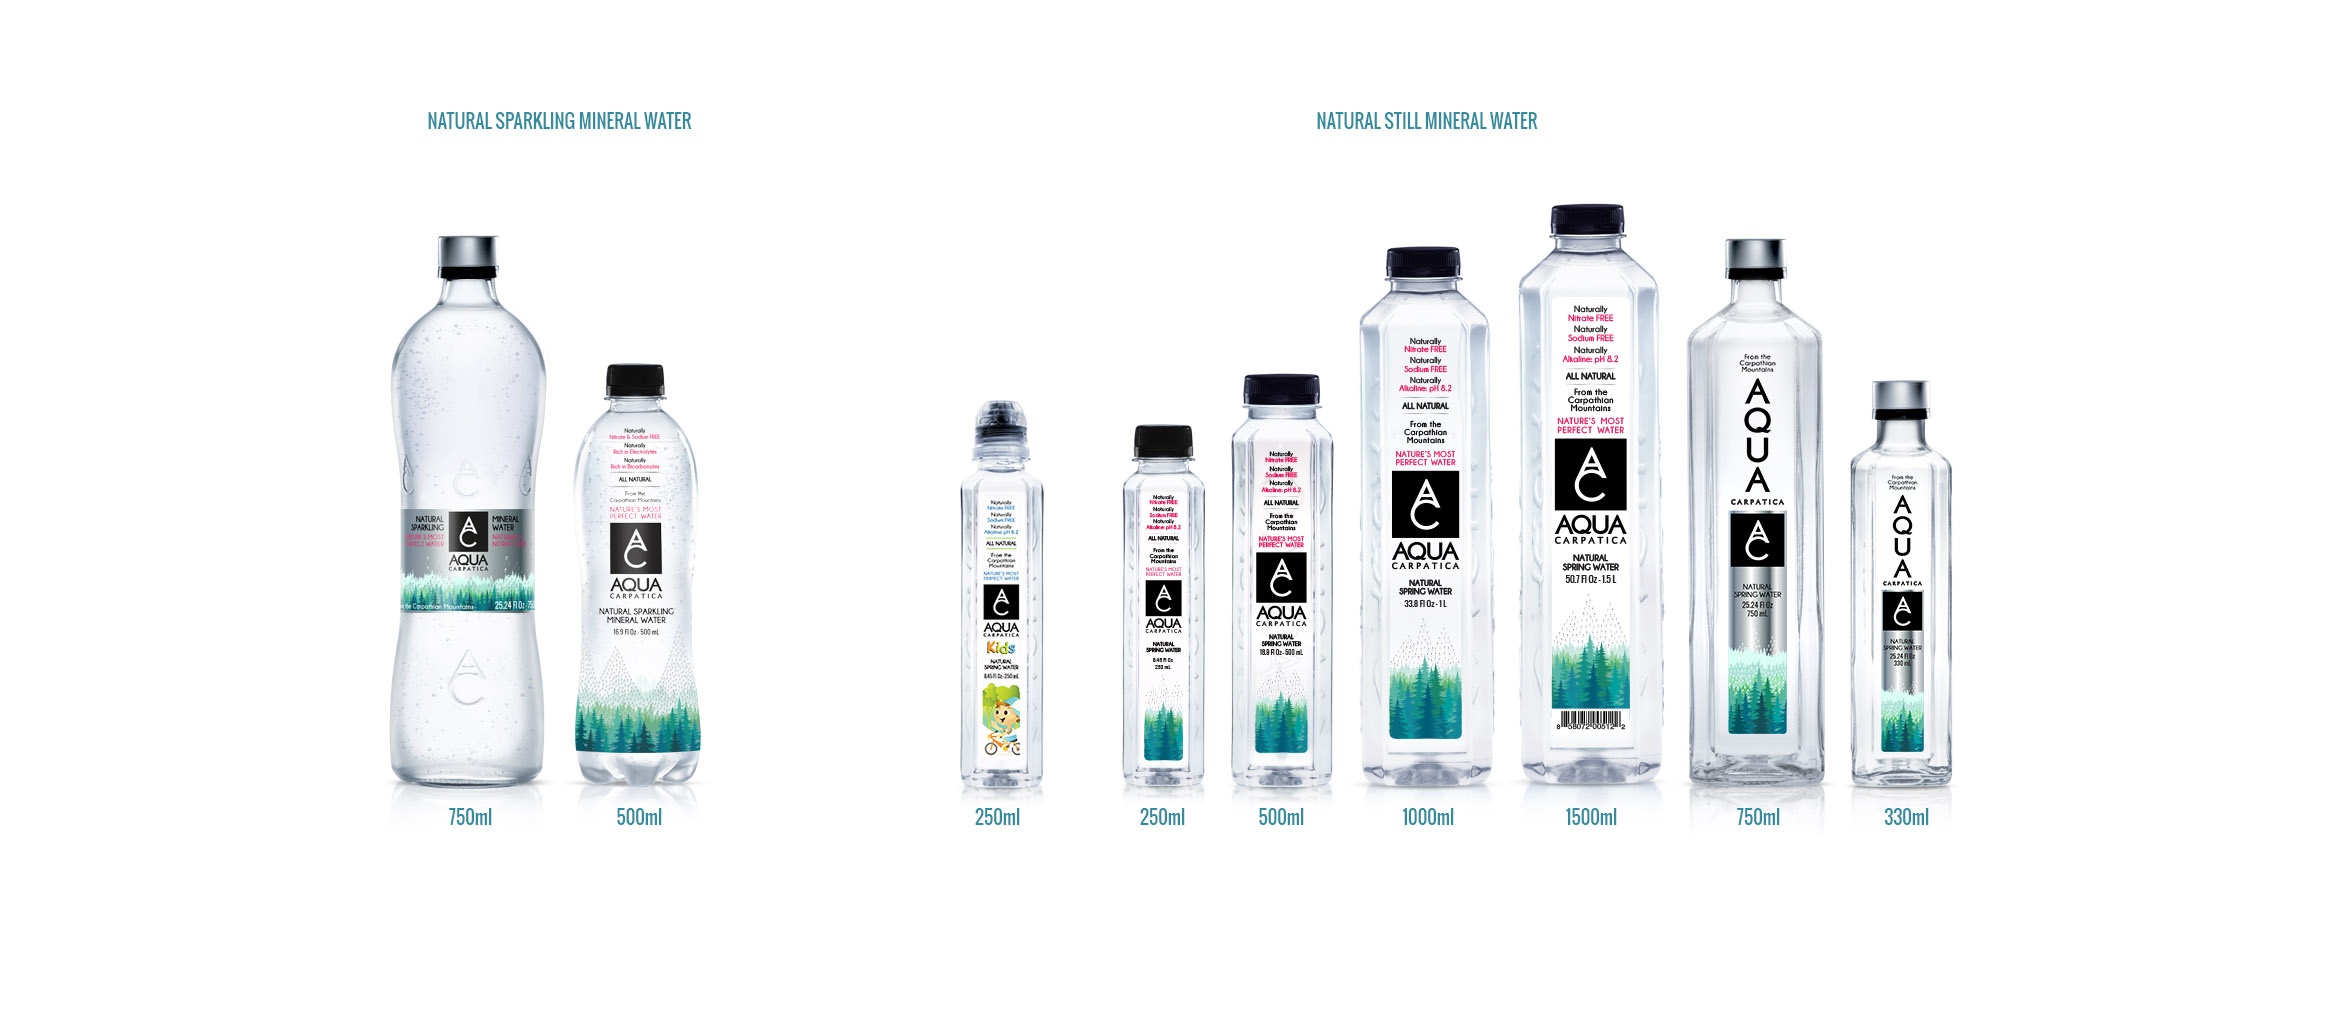 The AQUA Carpatica product range: the Natural Sparkling Mineral Water products and the Natural Still Mineral Water products.